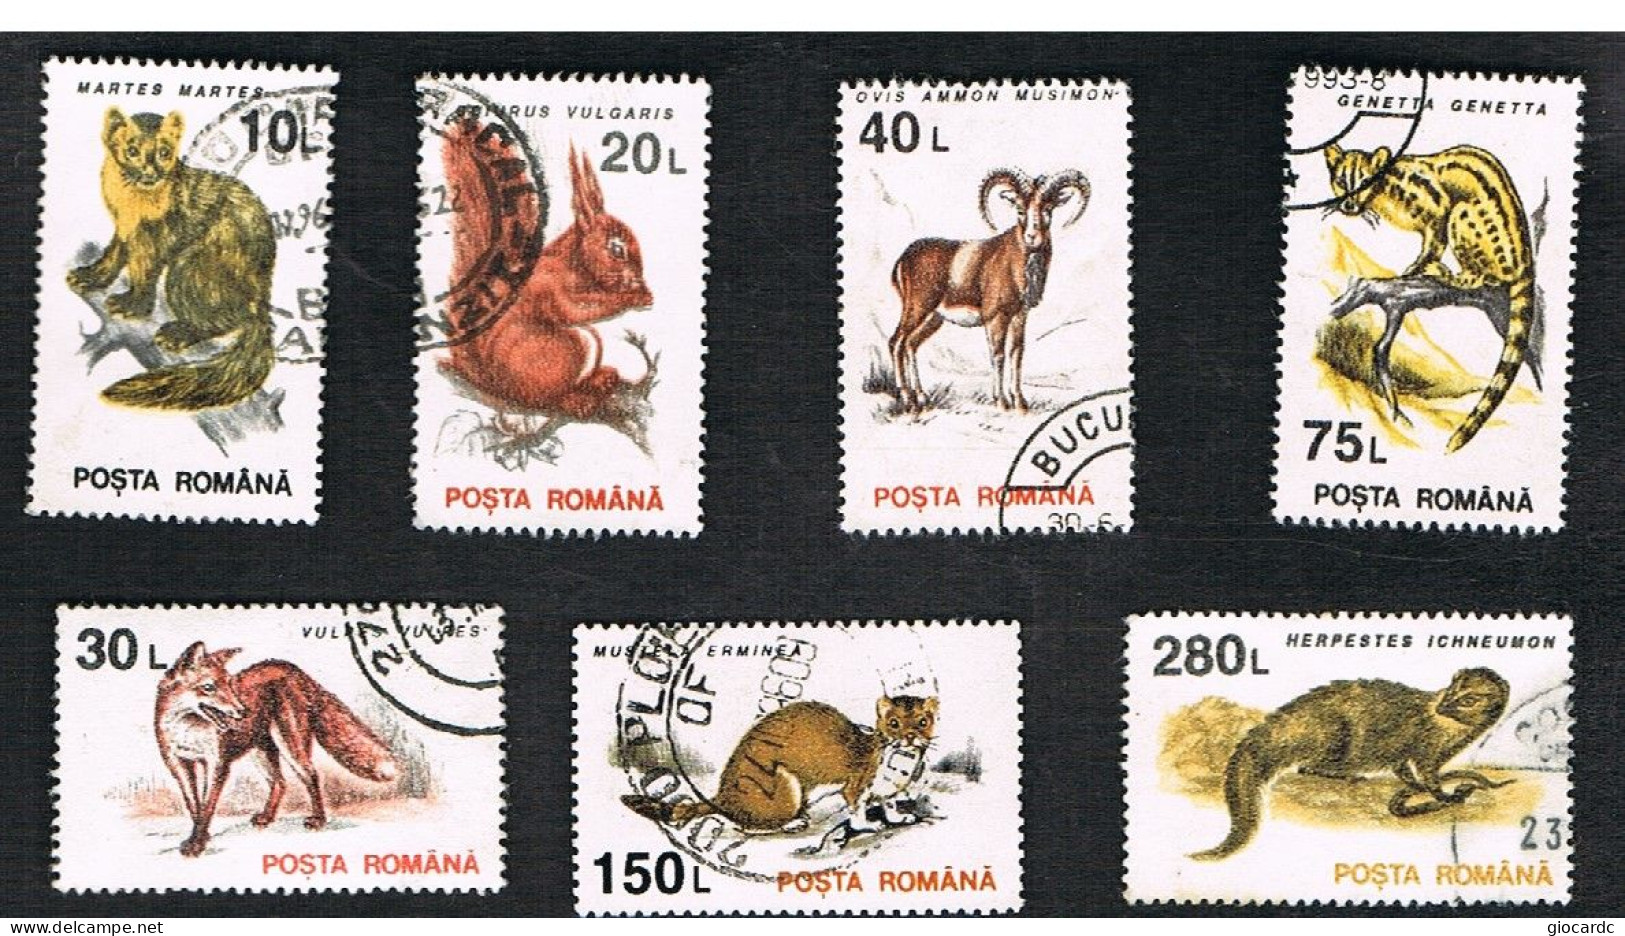 ROMANIA - SG 5533.5542  - 1995  CURRENT SERIE: ANIMALS   (7 STAMPS OF THE SET  ON WHITE PAPER)  - USED ° - Usati